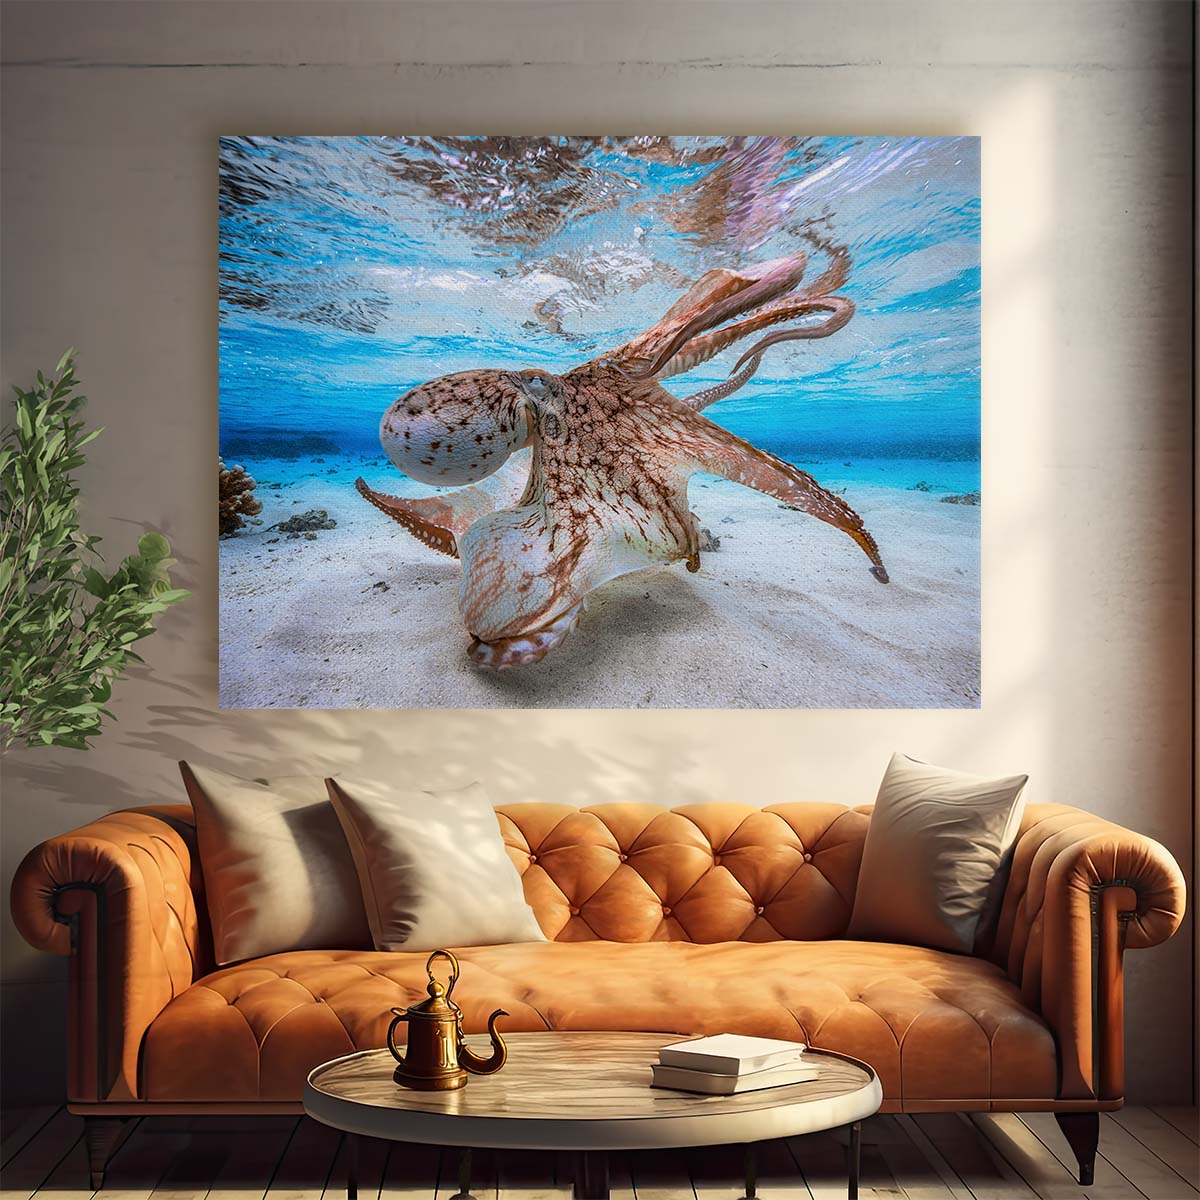 Red Octopus Underwater Seascape Photography Wall Art